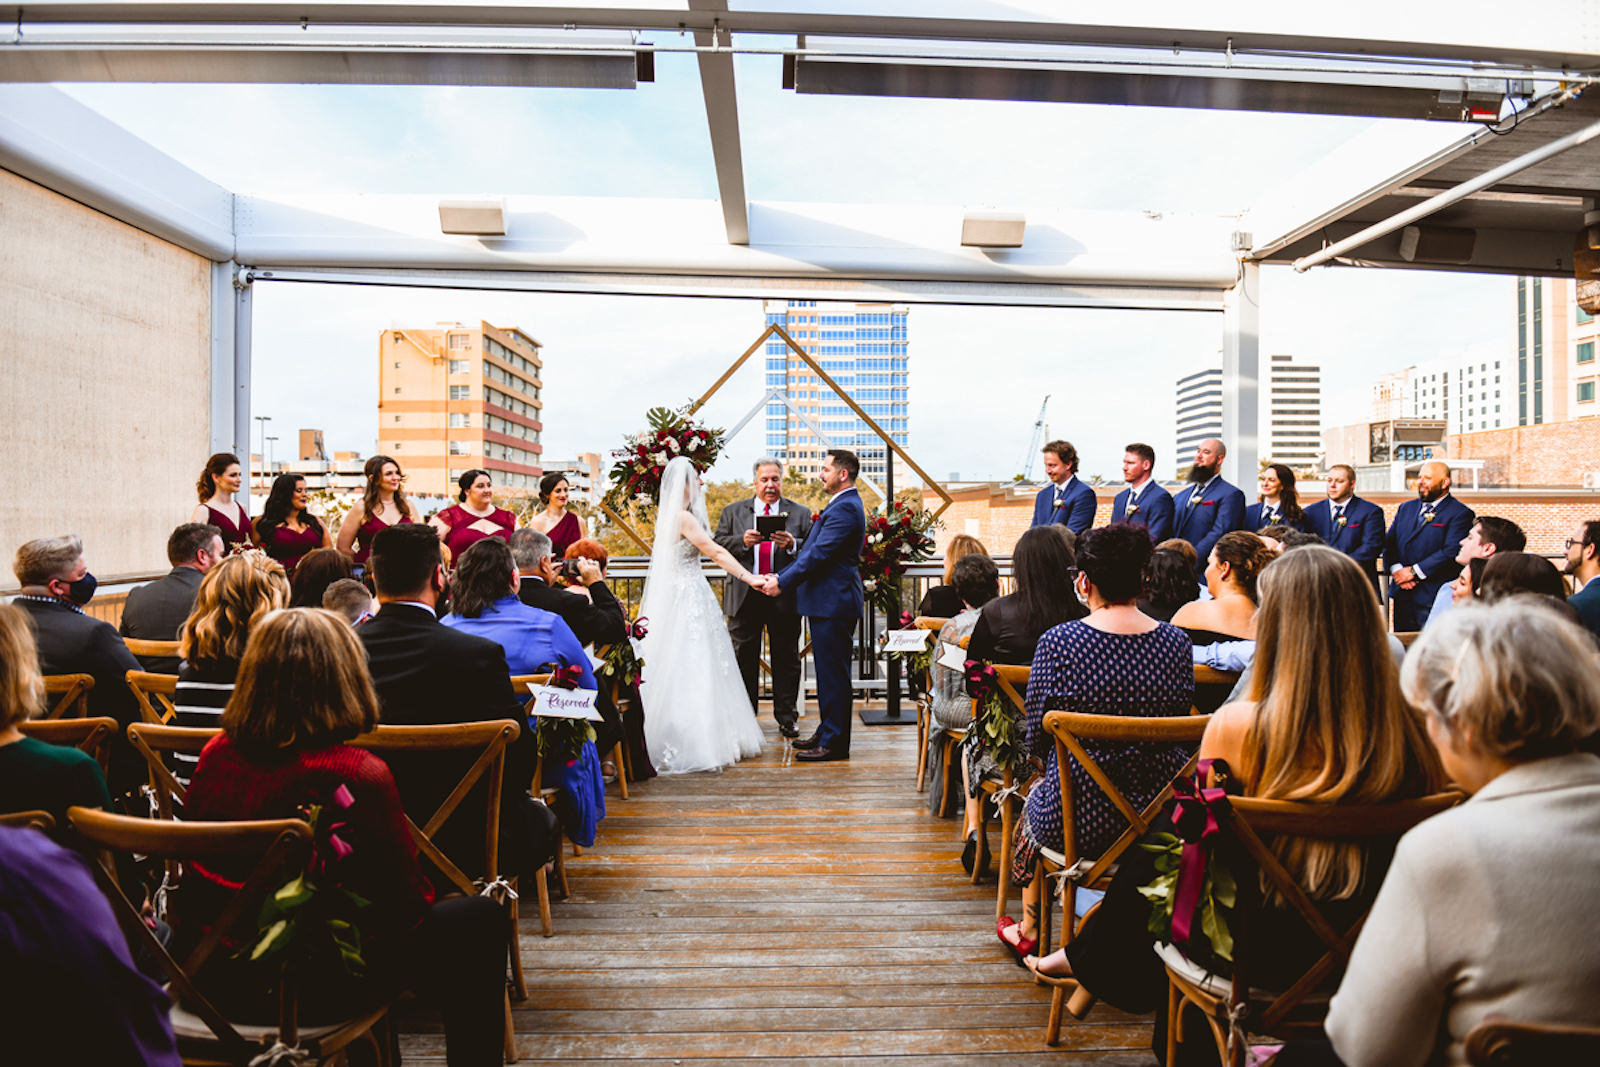 Bride and Groom Exchanging Wedding Vows During Rooftop Ceremony in Front of Geometric Sculpture | Tampa Bay Wedding Planner Special Moments Event Planning | St. Pete Wedding Venue Red Mesa Events